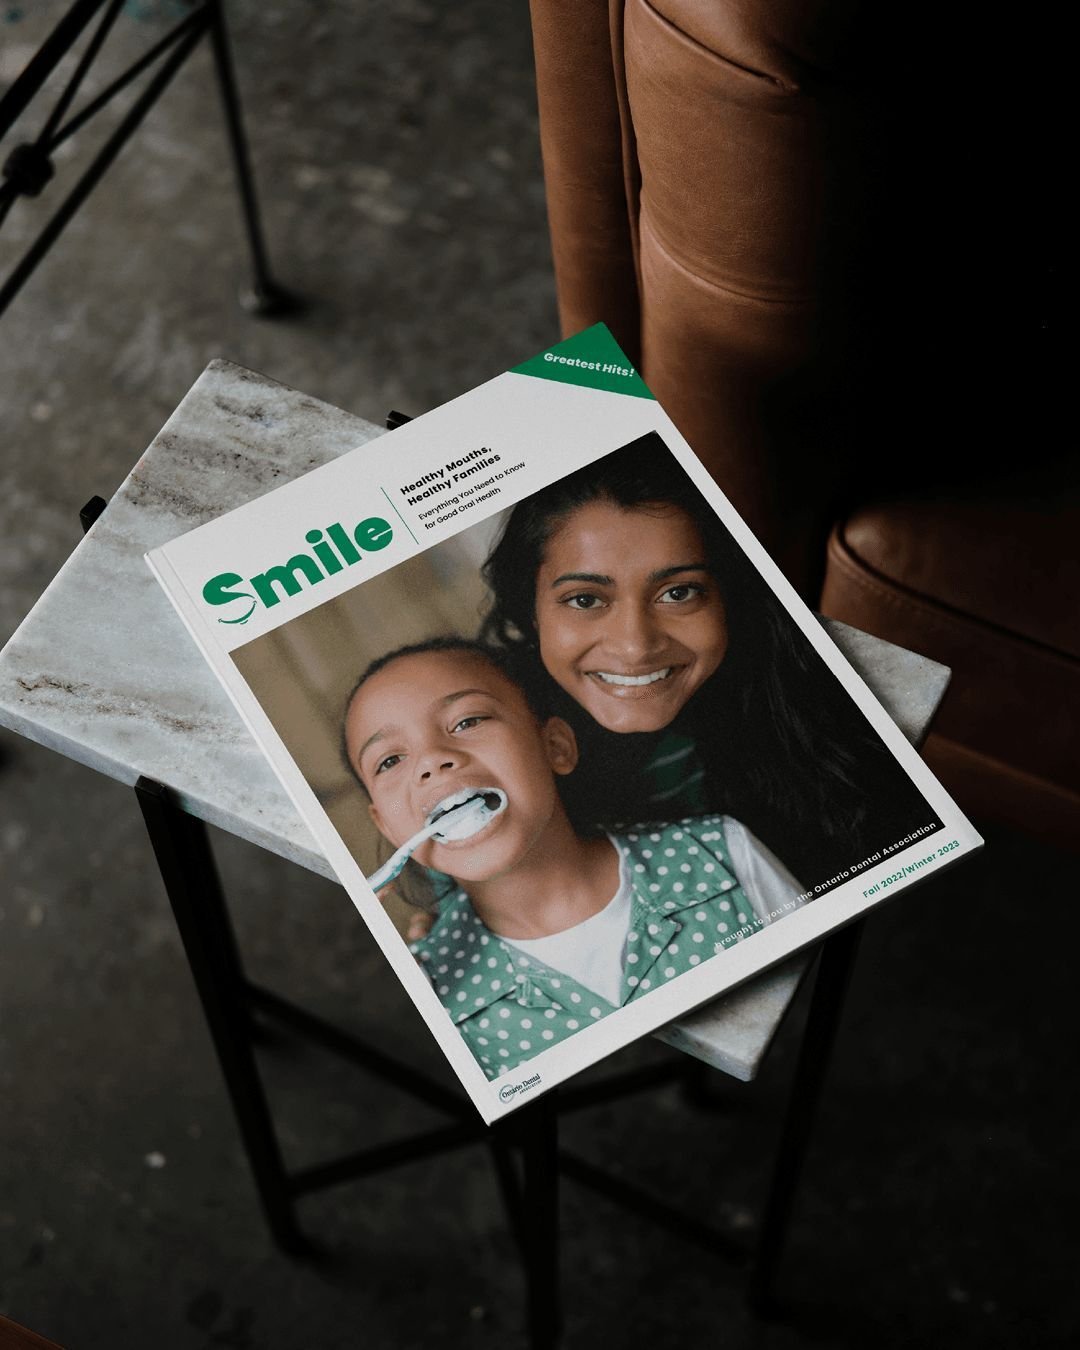 Introducing the new ODA Smile magazine!

This magazine contains helpful, easy-to-understand tips and articles to help guide anyone to better oral health. Flip through this edition of Smile for more information about pediatric dentistry and profiles o